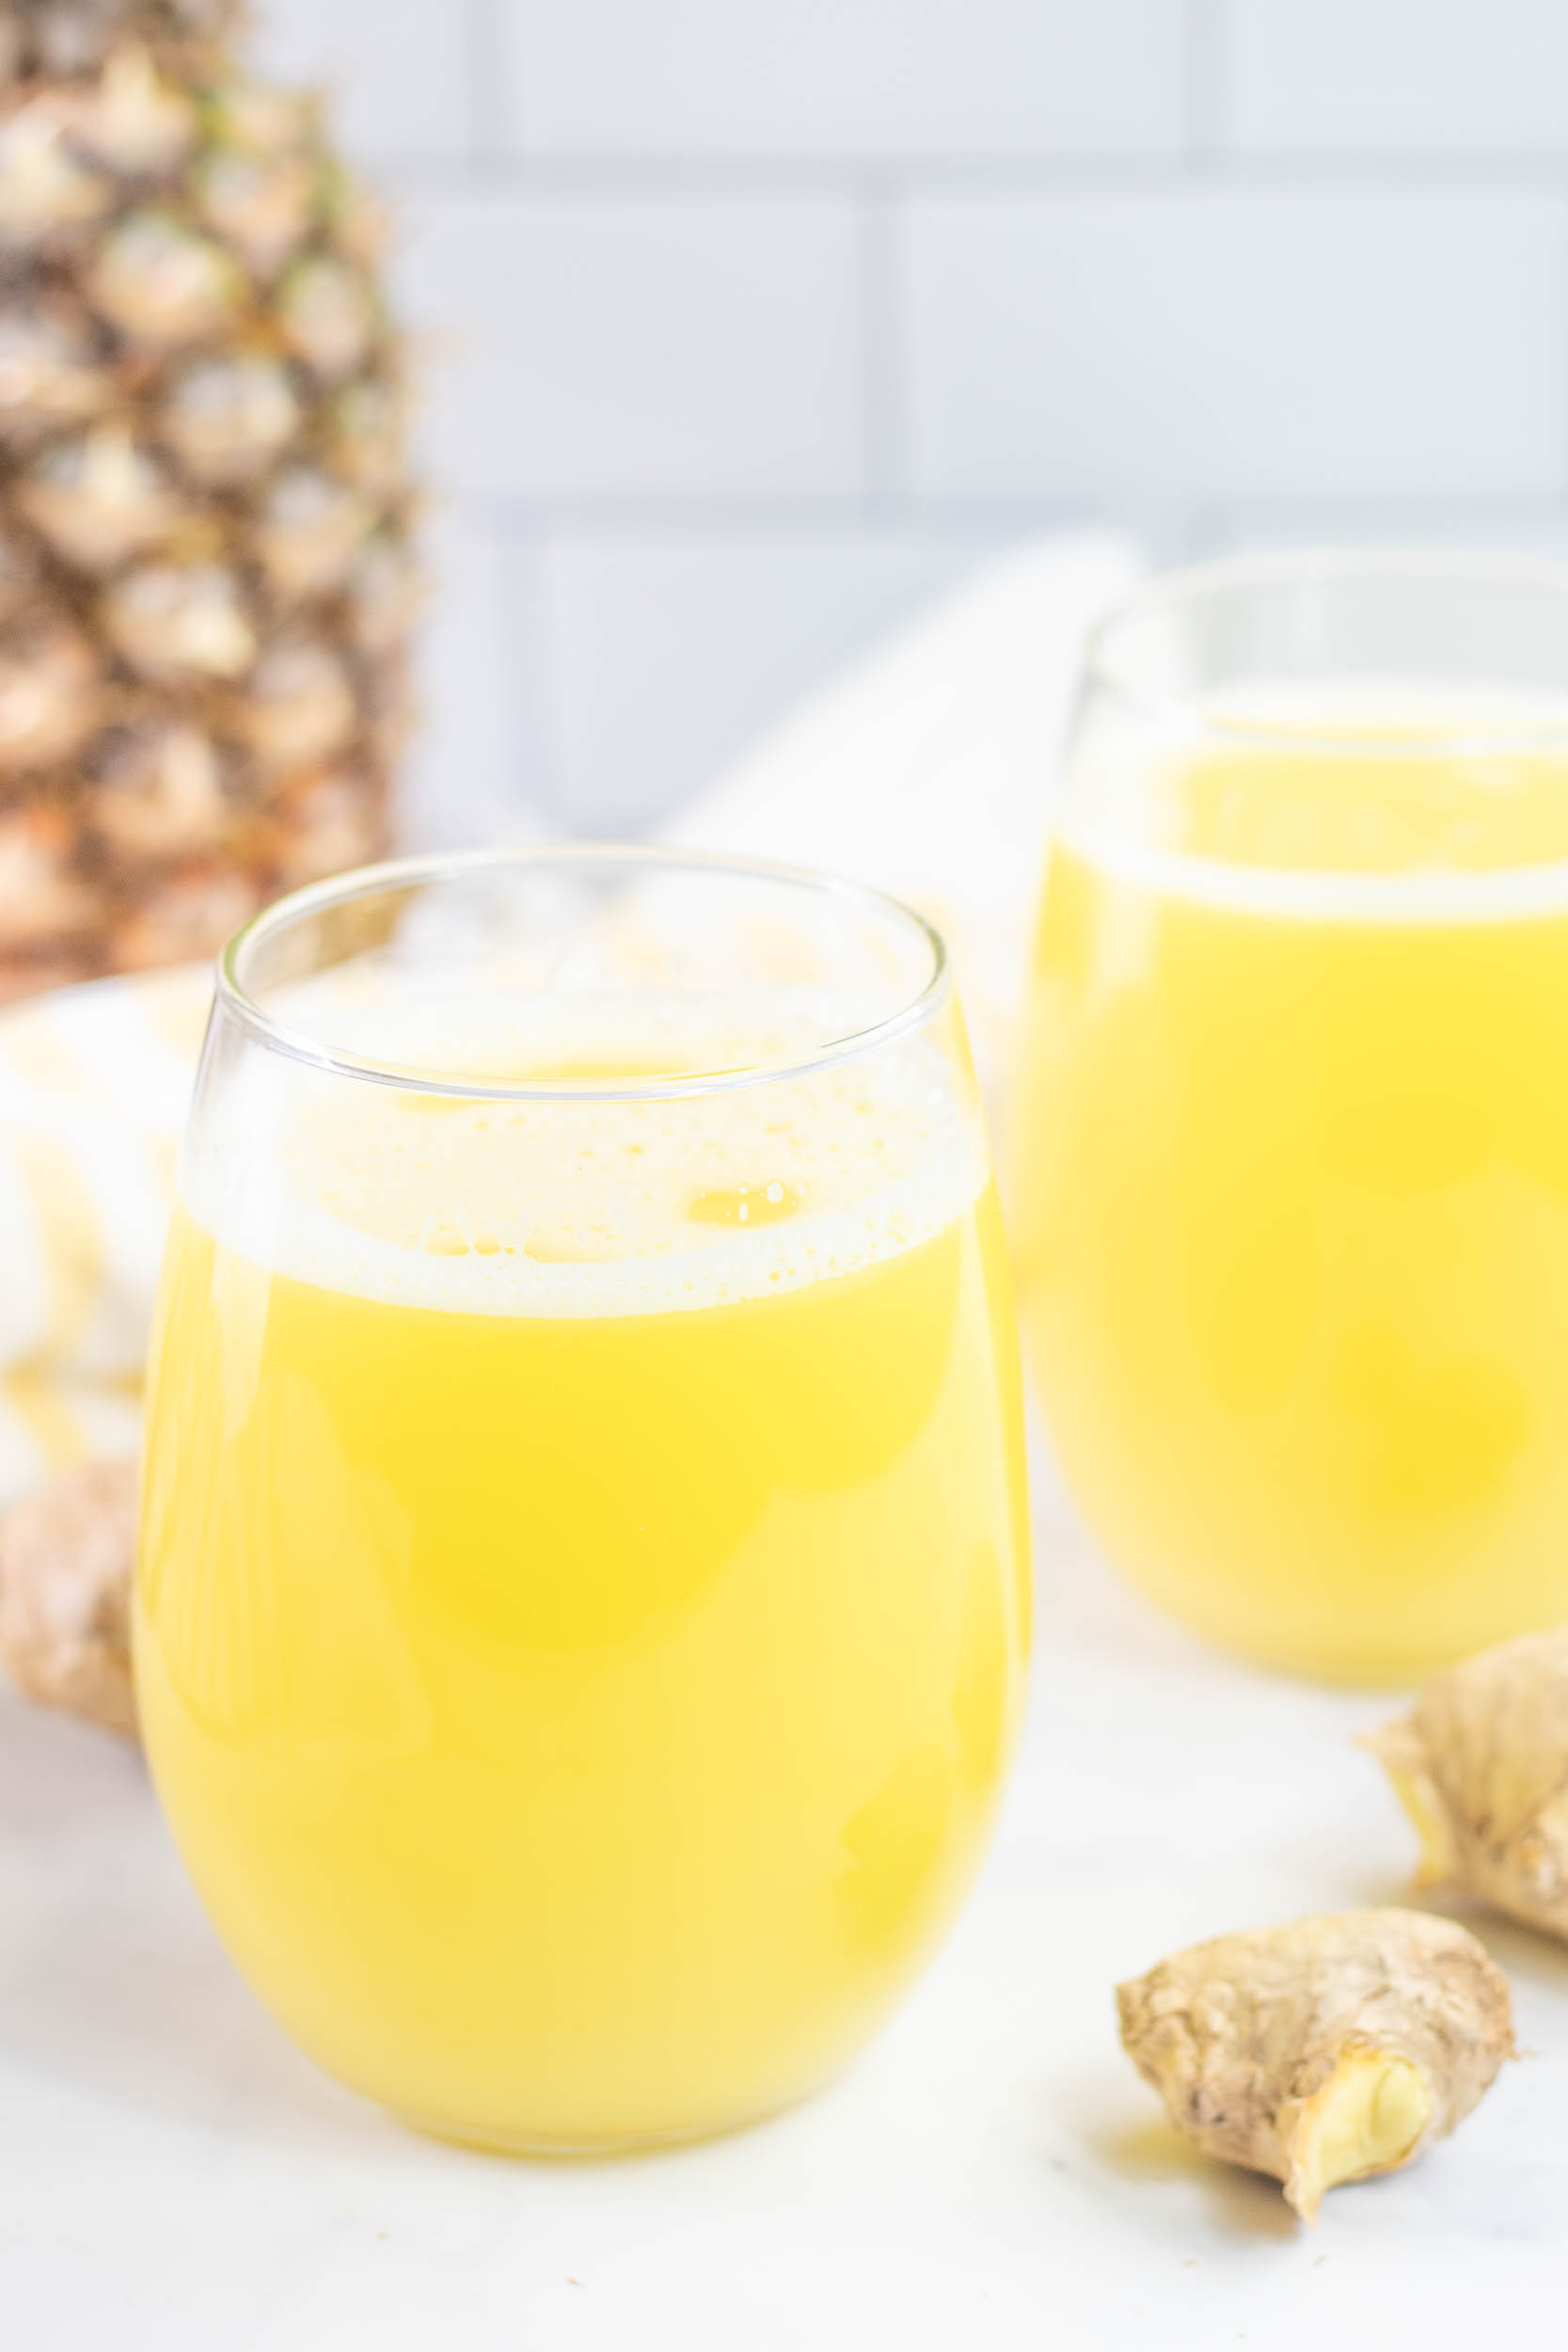 Ginger Pineapple Drink (Concentrate, Healthy)